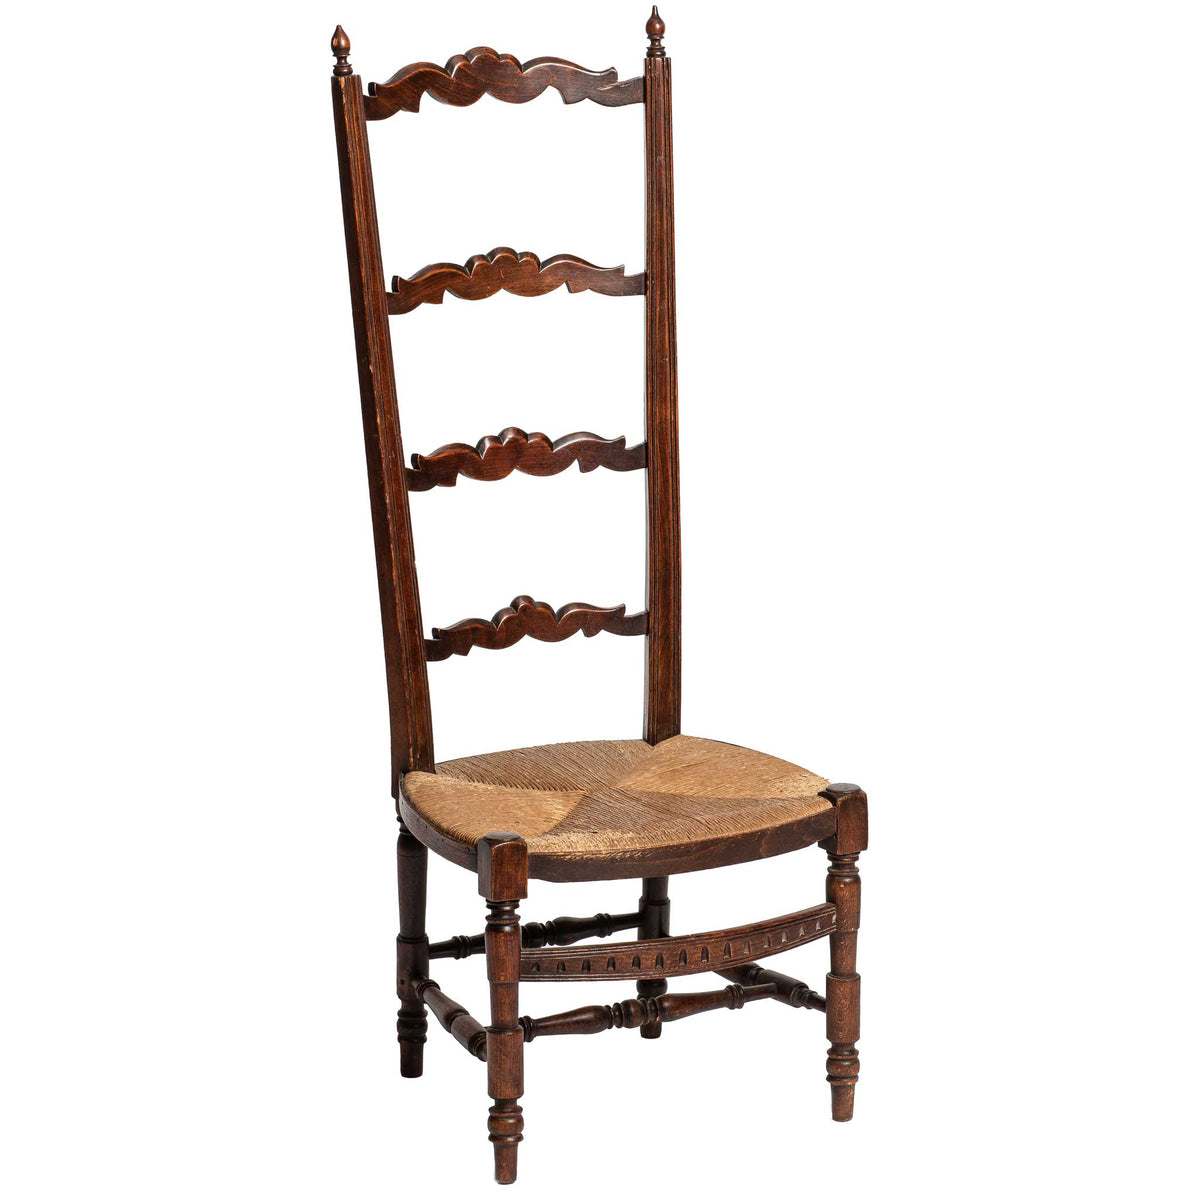 ANTIQUE HIGH LADDEBACK CHAIR with RUSH SEAT